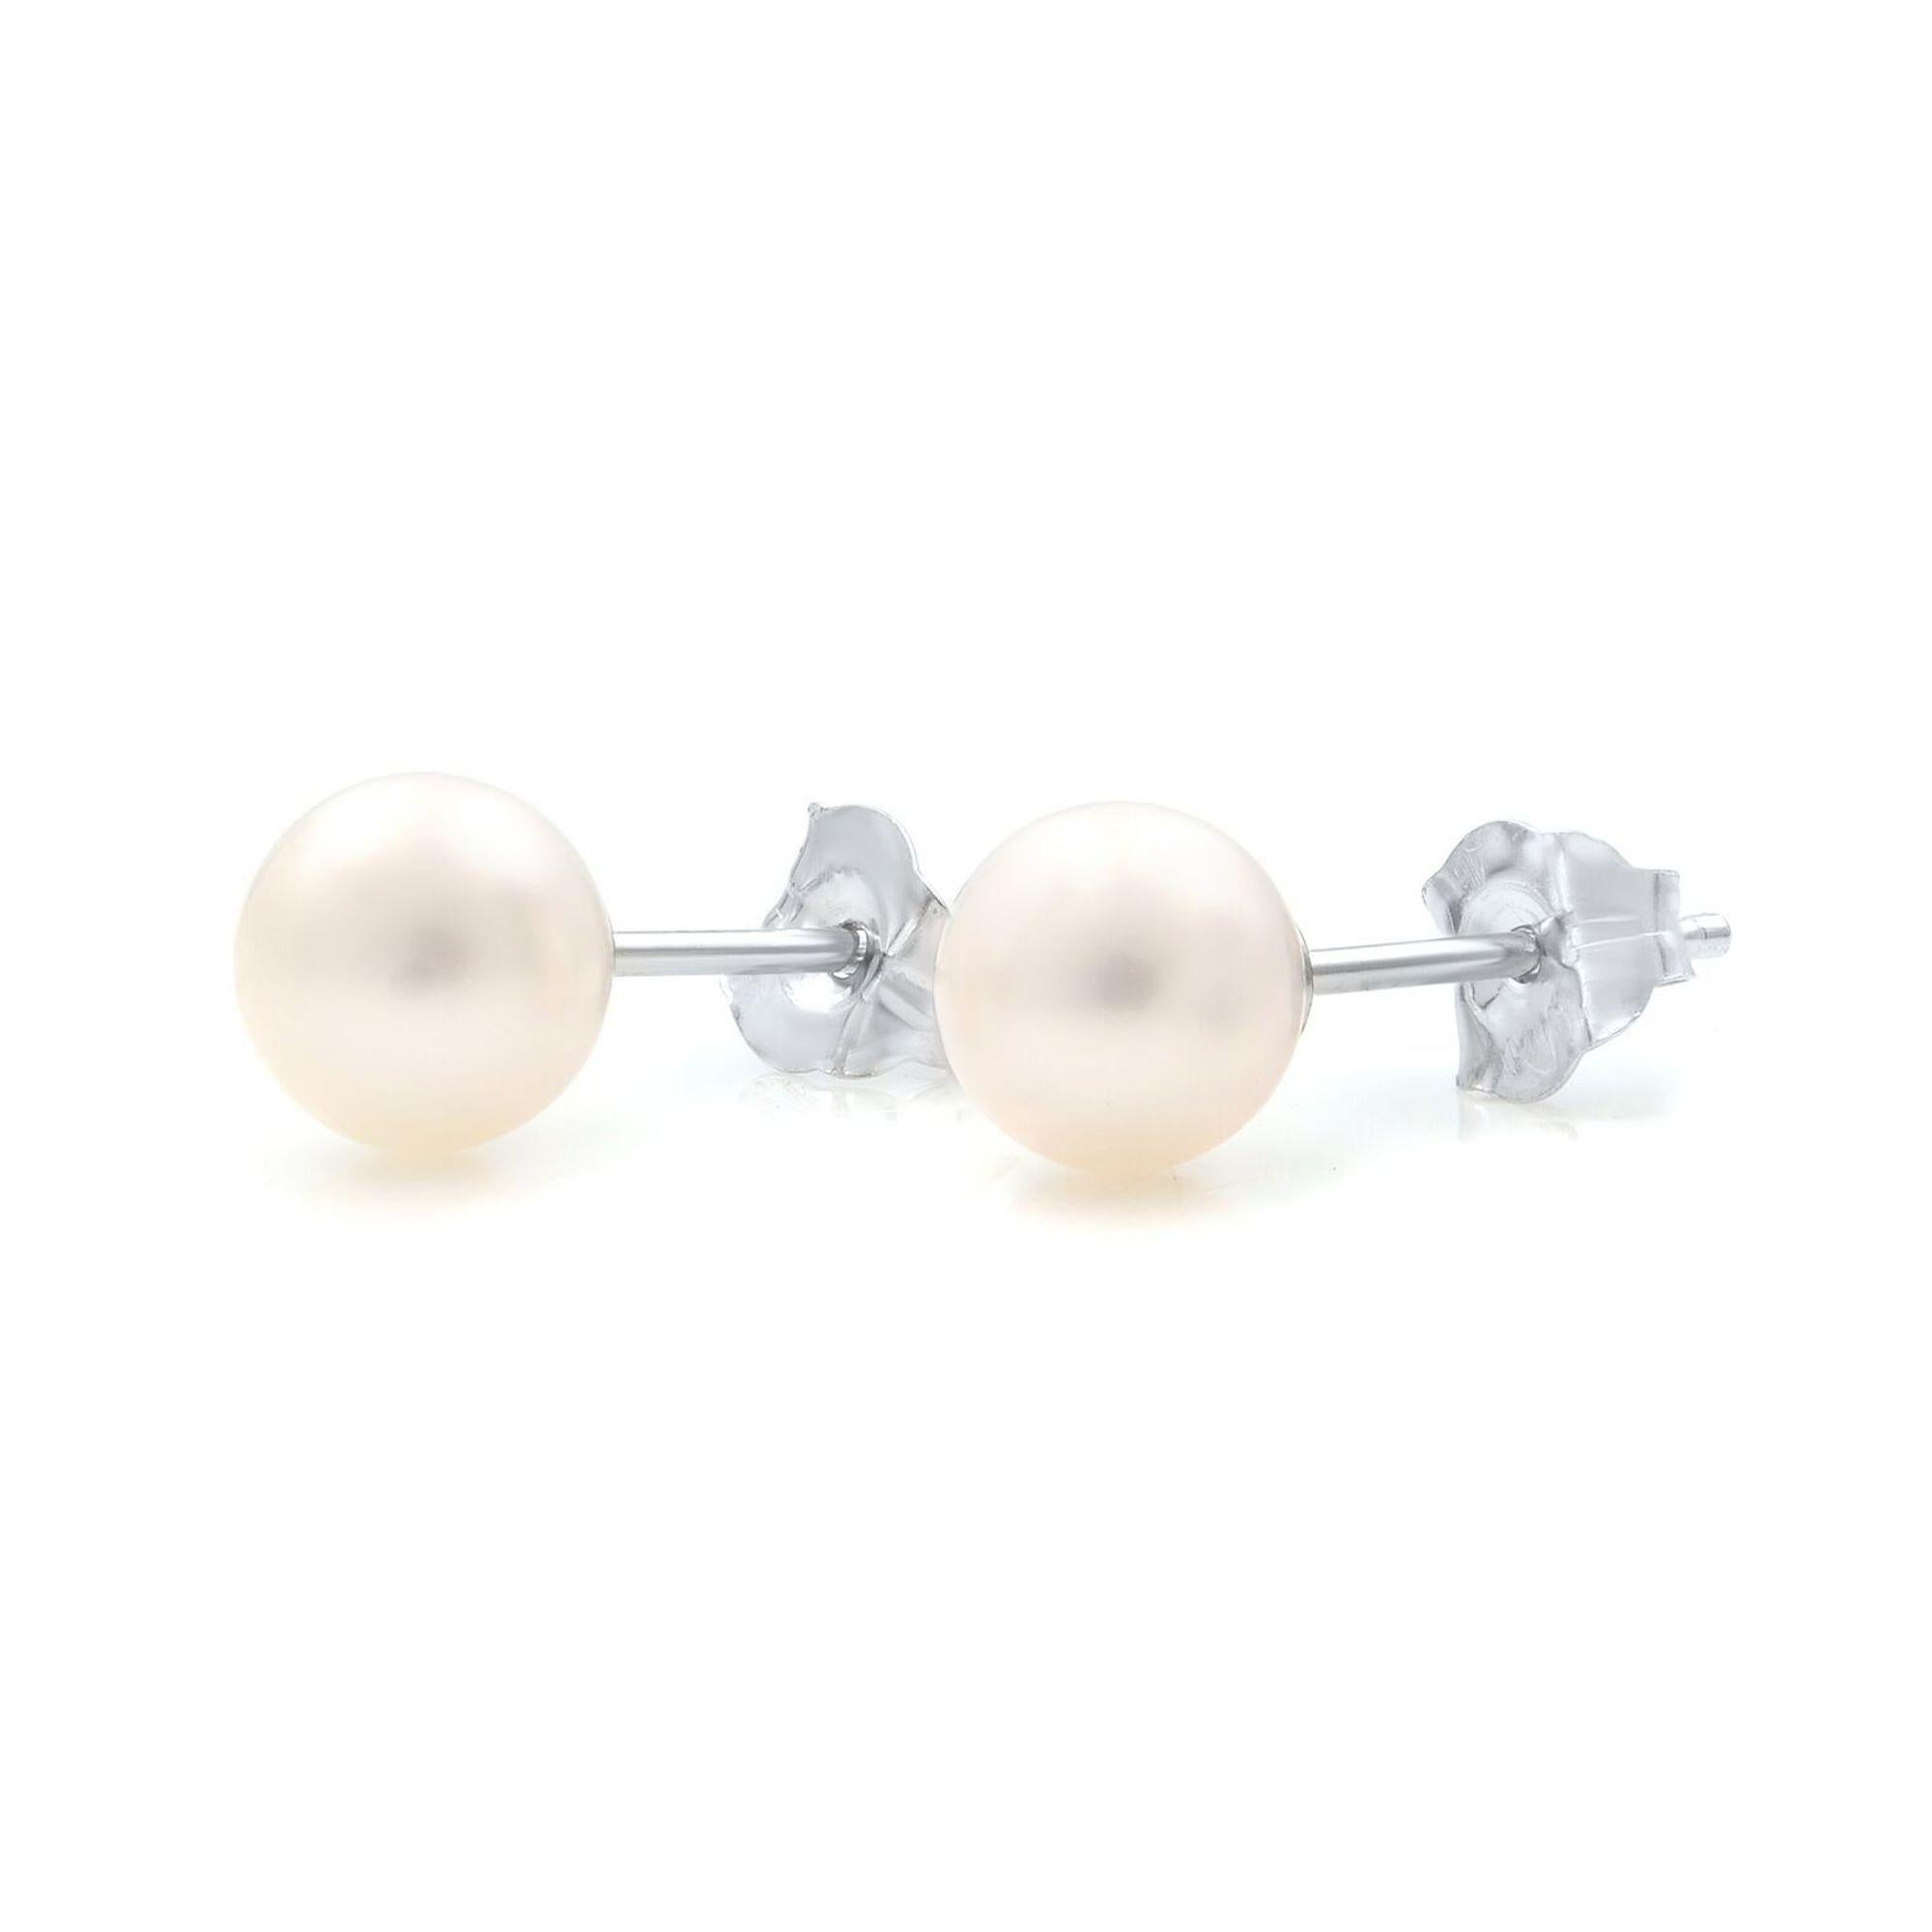 Beautiful and classic small white Pearls stud earrings which are set in 14K white gold. Natural white freshwater pearls. Push backs. Each pearl is 5mm. Comes with a presentable gift box.